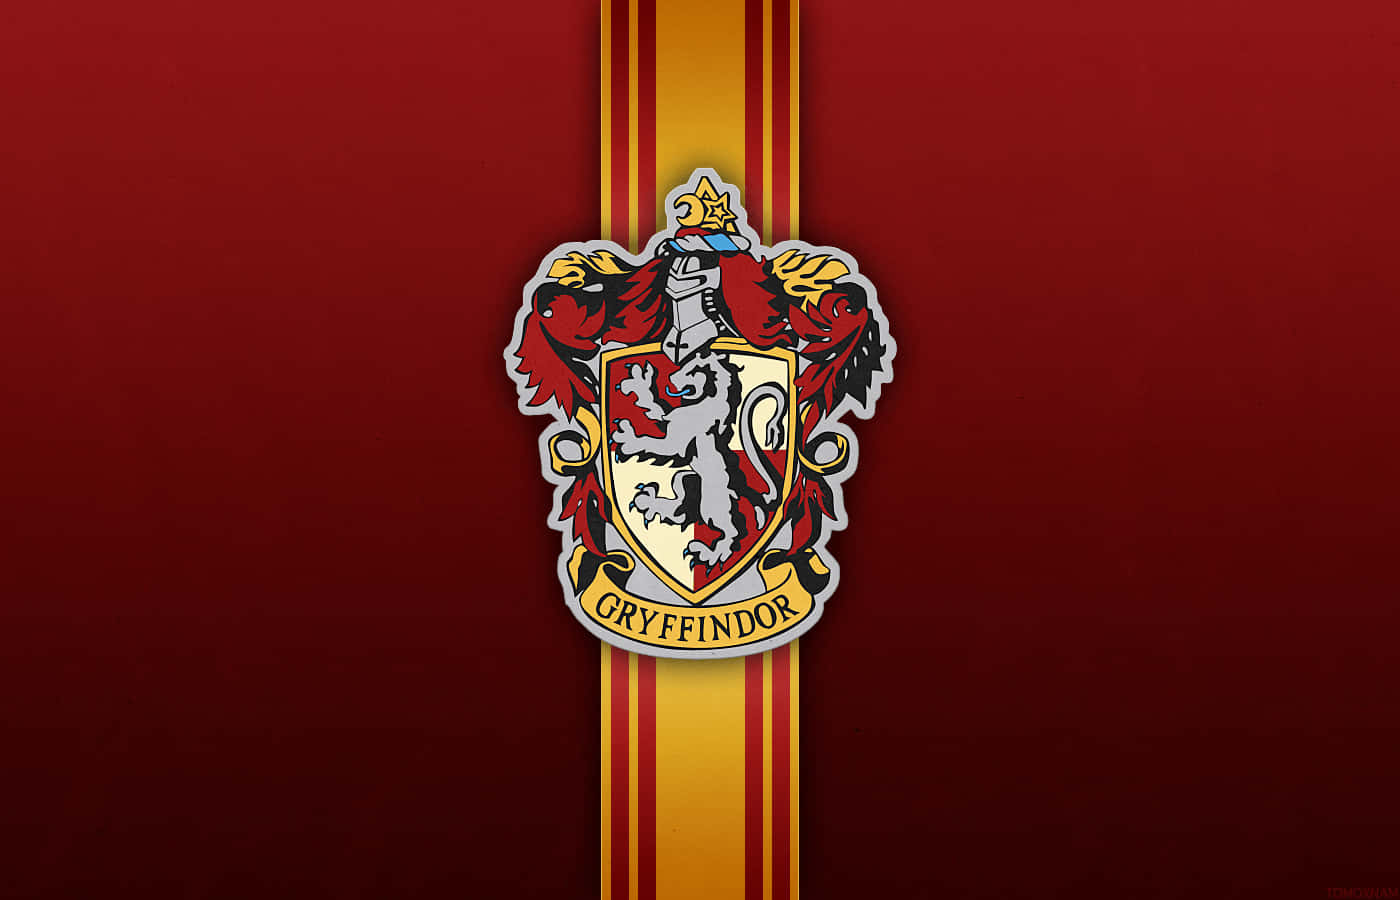 Harry Potter Wallpaper Gryffindor Quidditch Seeker Official Imported  European Wallpaper - Amazon.com